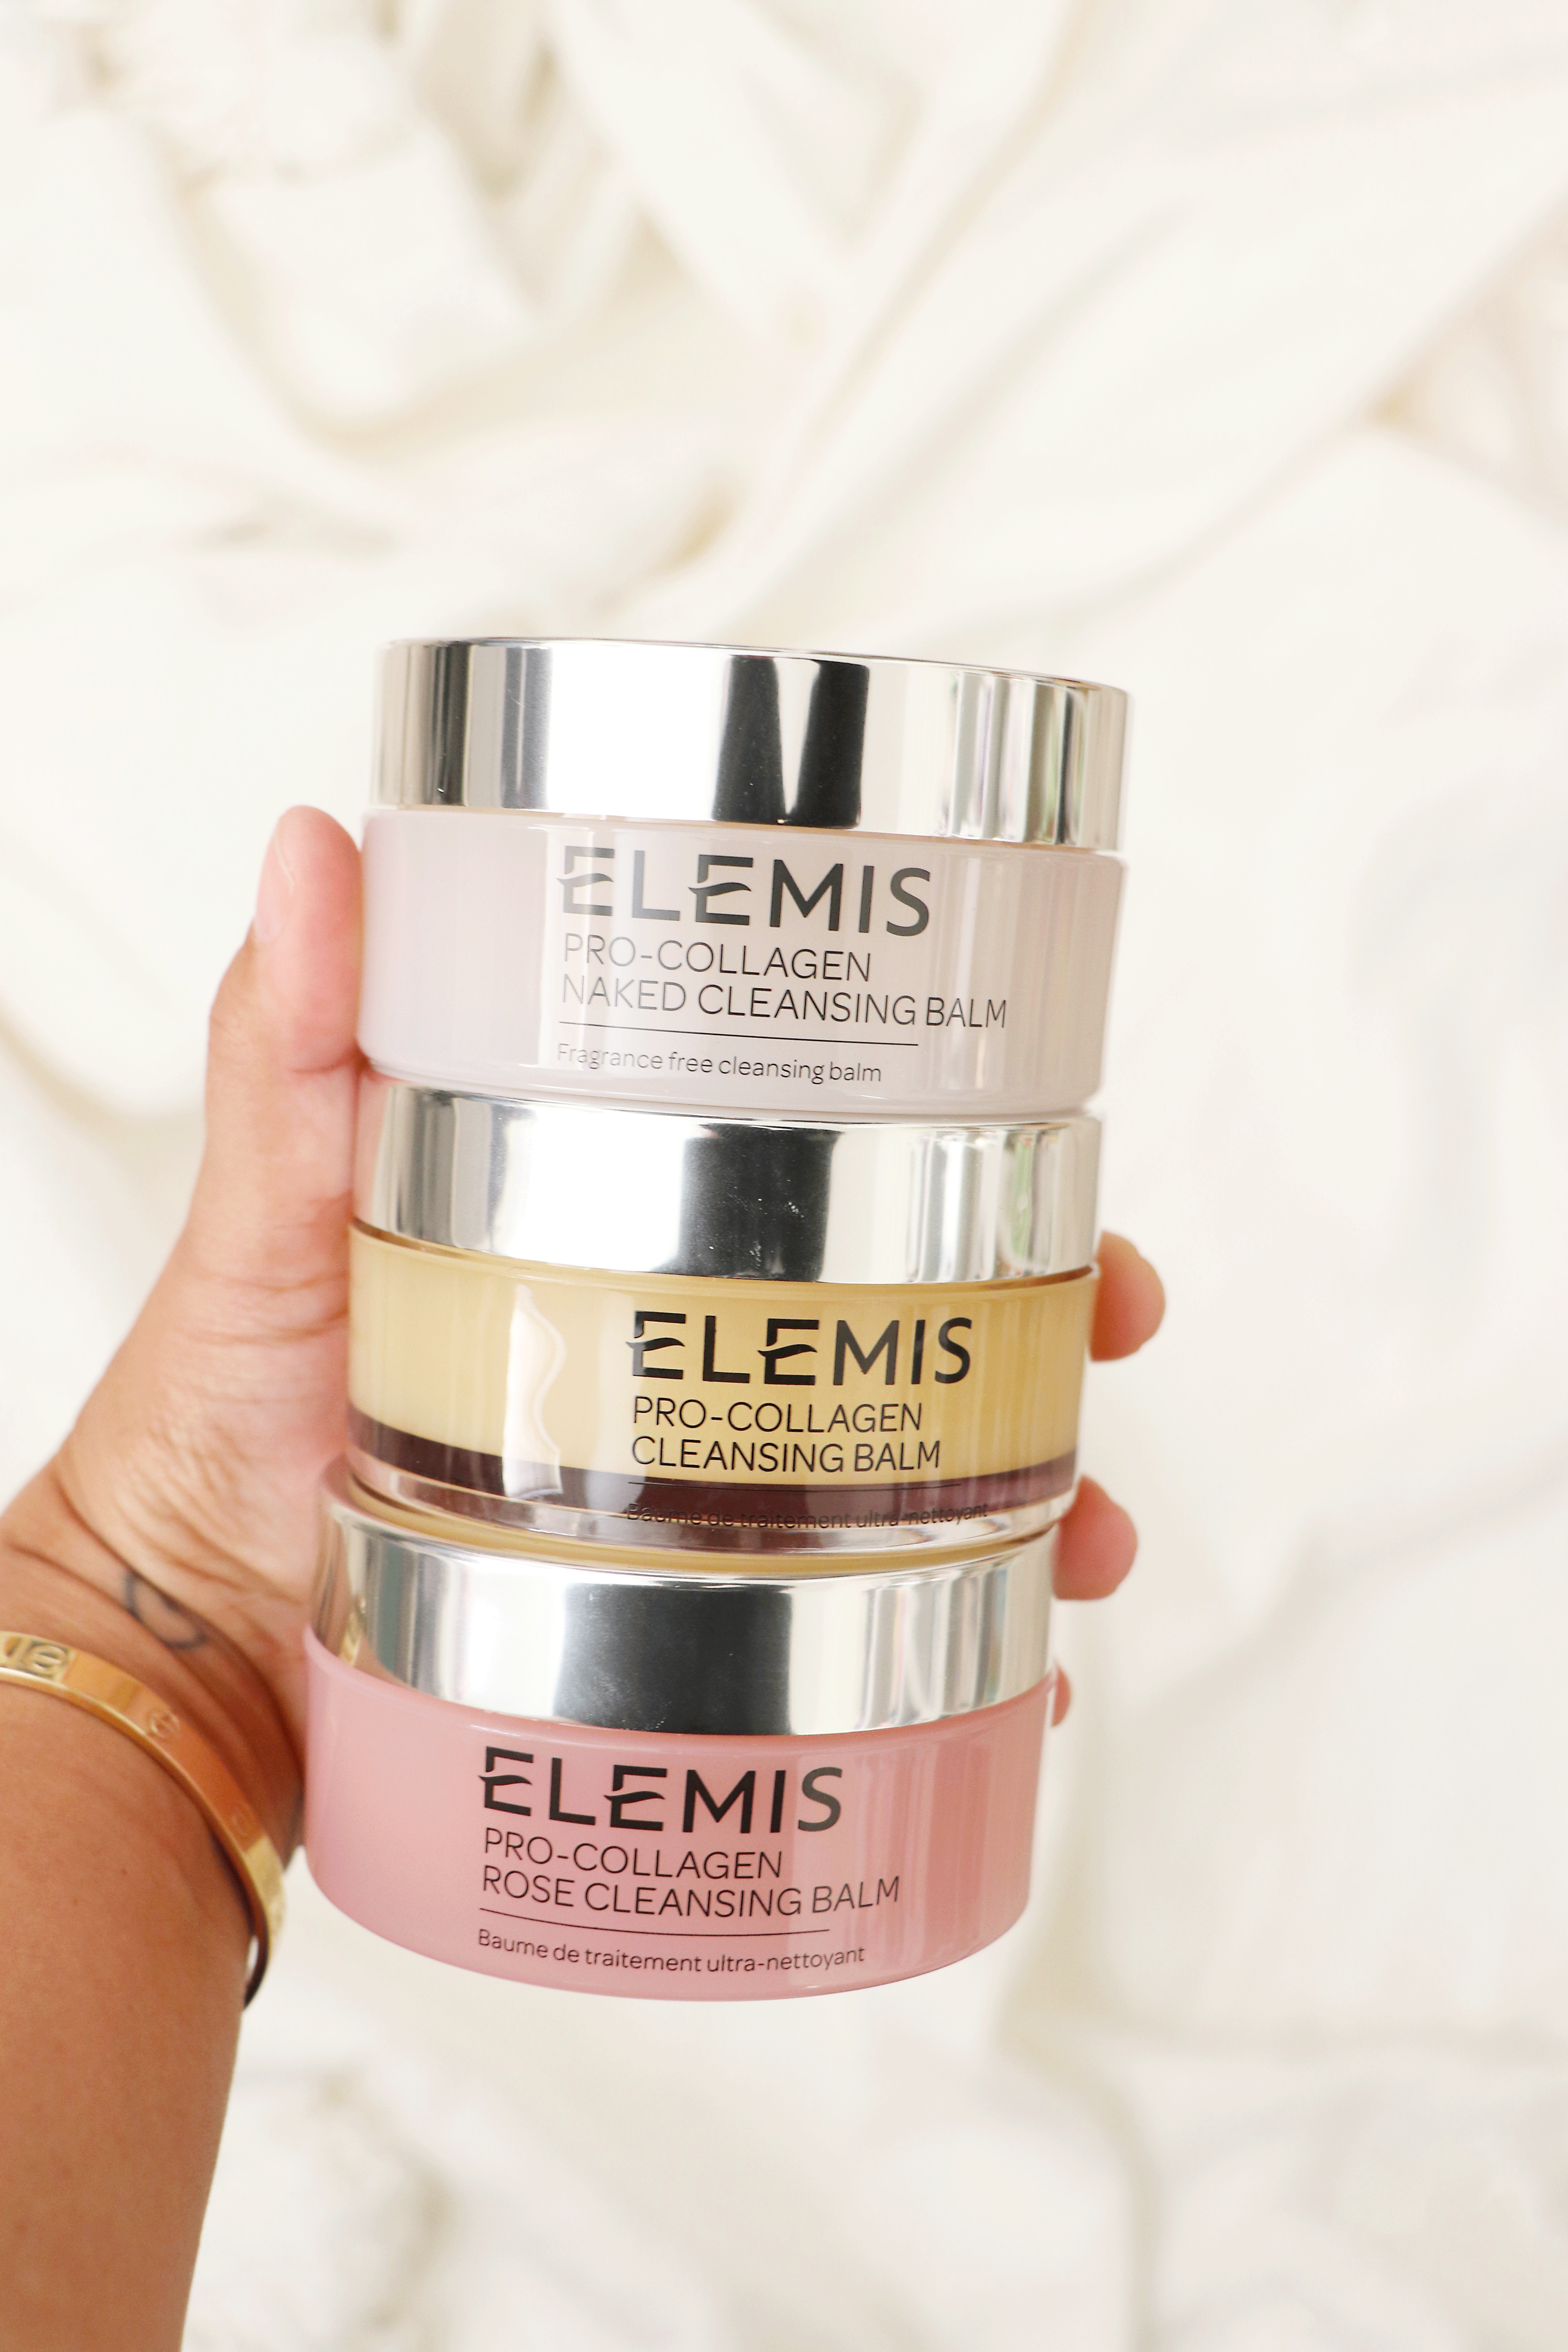 Looking for ways to use Elemis Pro-Collagen Cleansing Balm? Los Angeles Blogger Jamie Lewis is sharing her top favorite ways here!